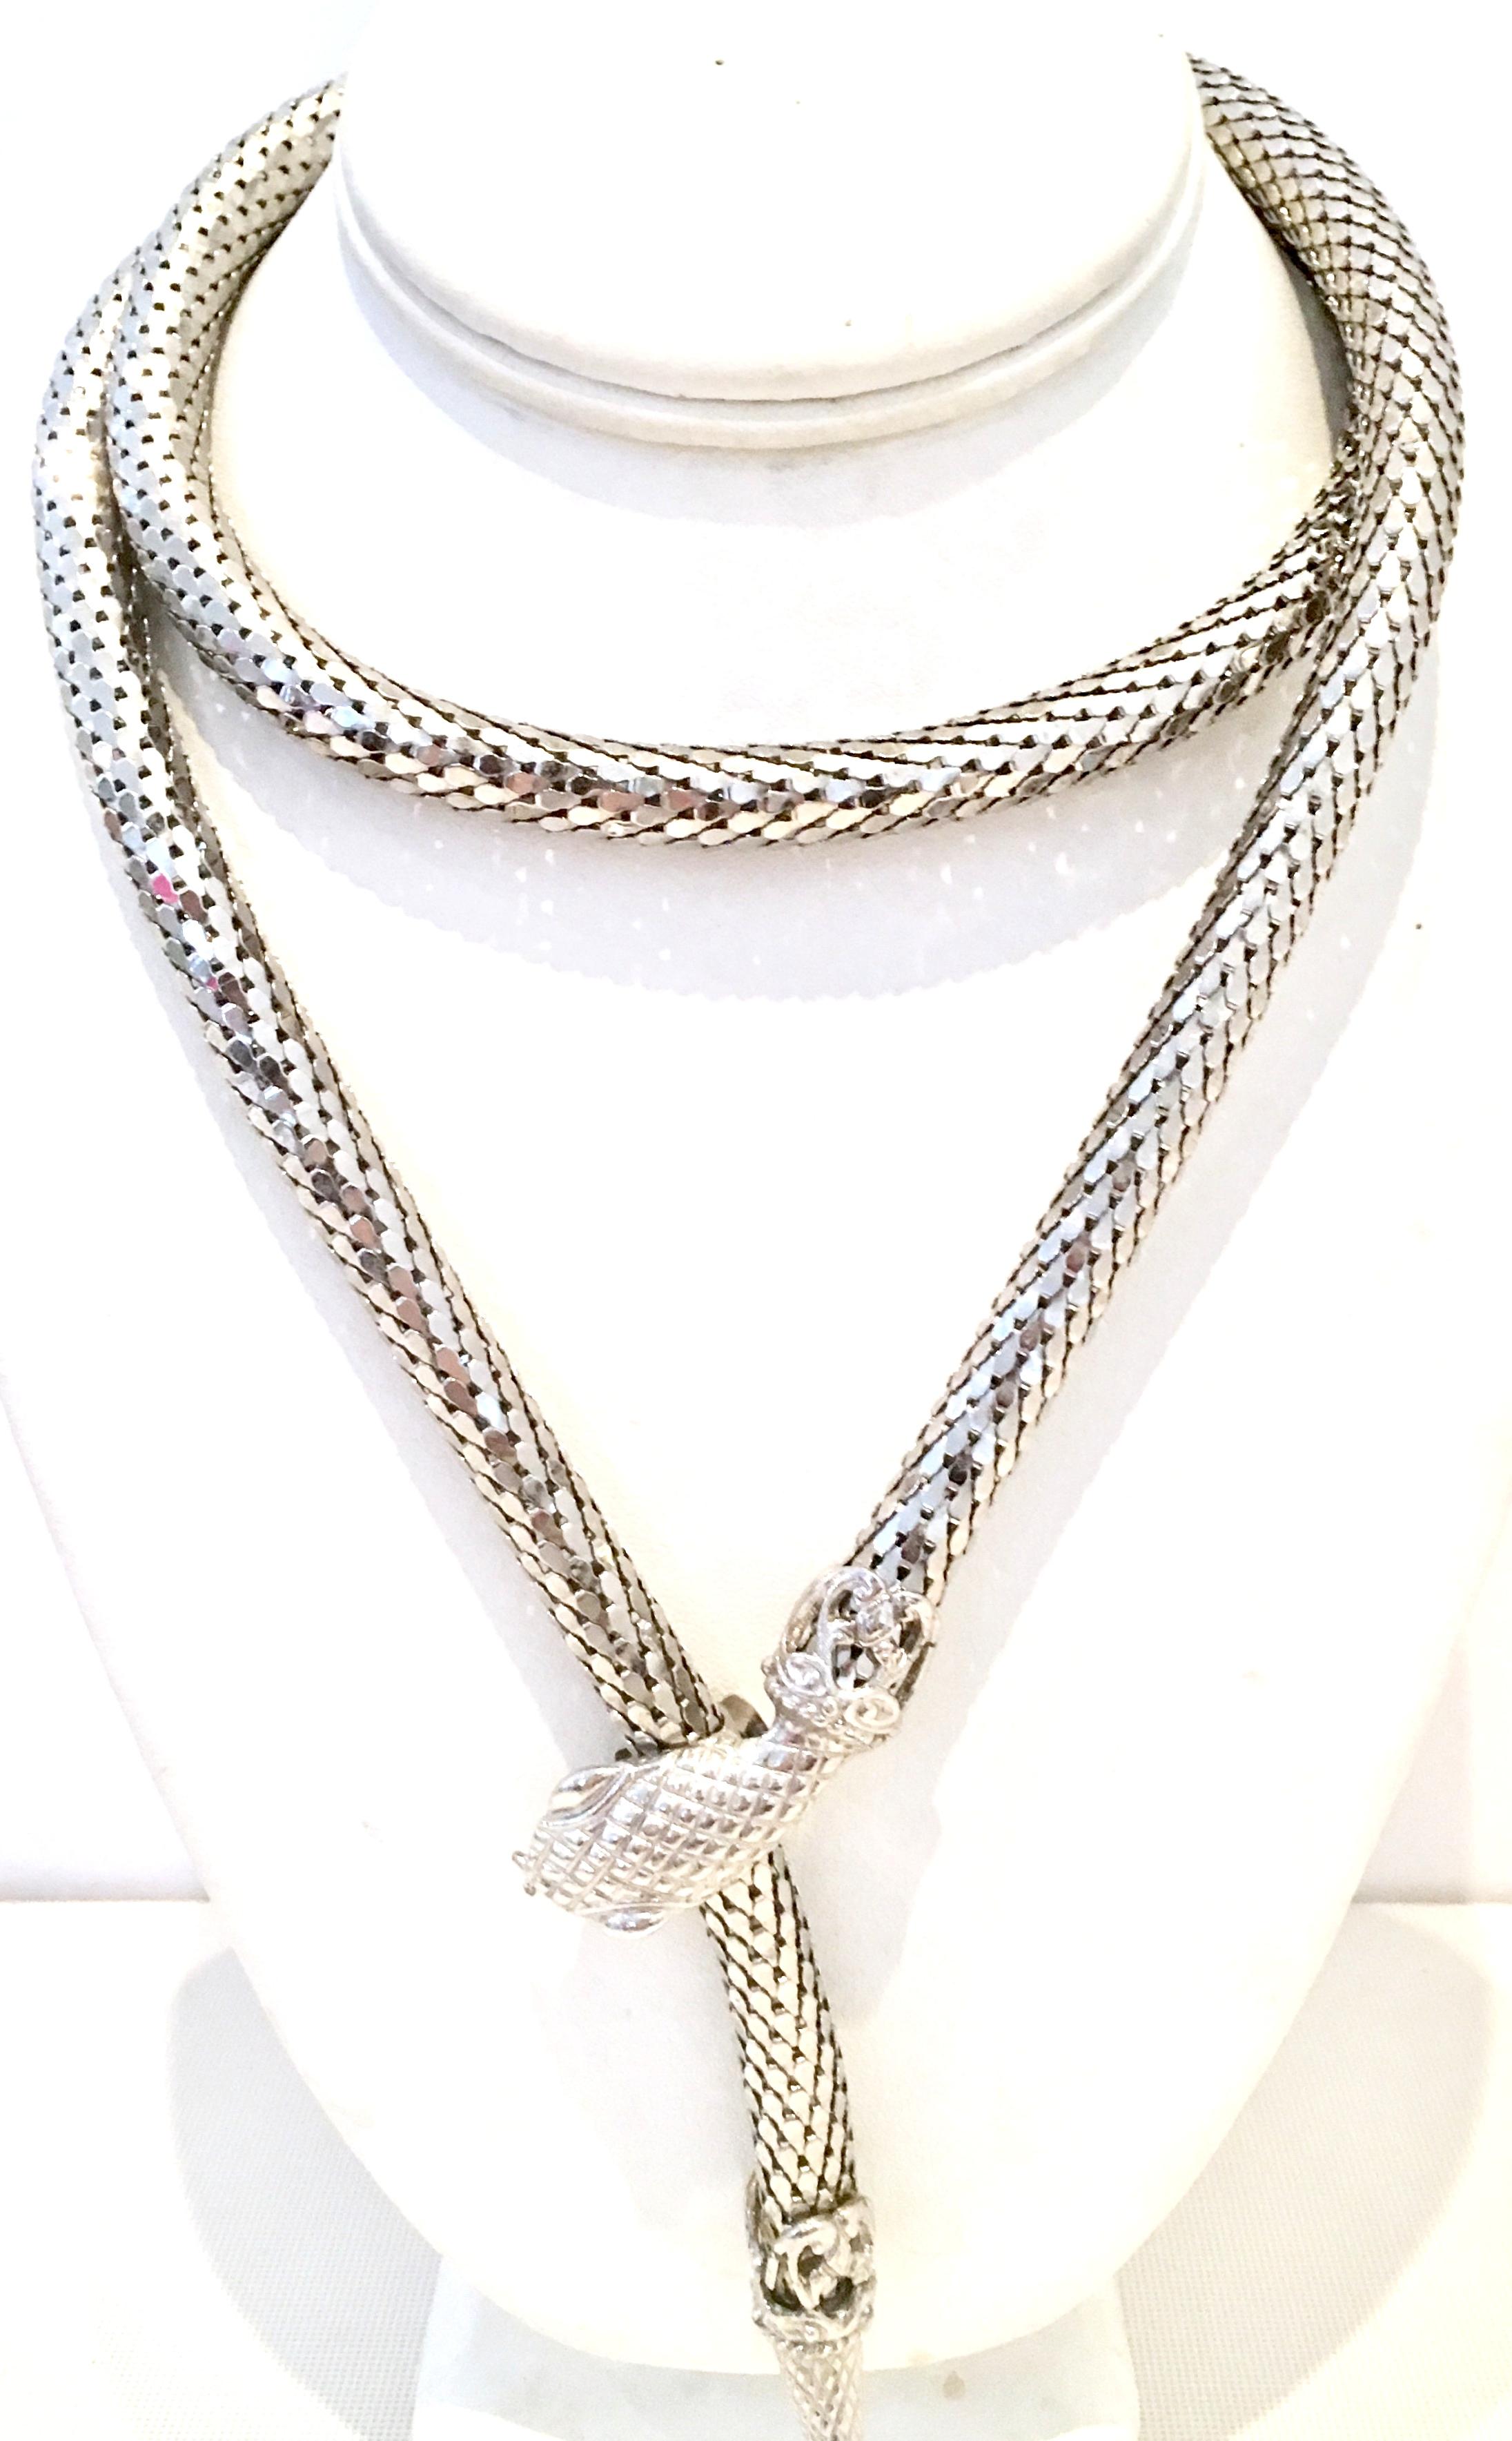 Women's or Men's 20th Century Silver Metal Mesh Snake Necklace Or Belt By, Whiting & Davis